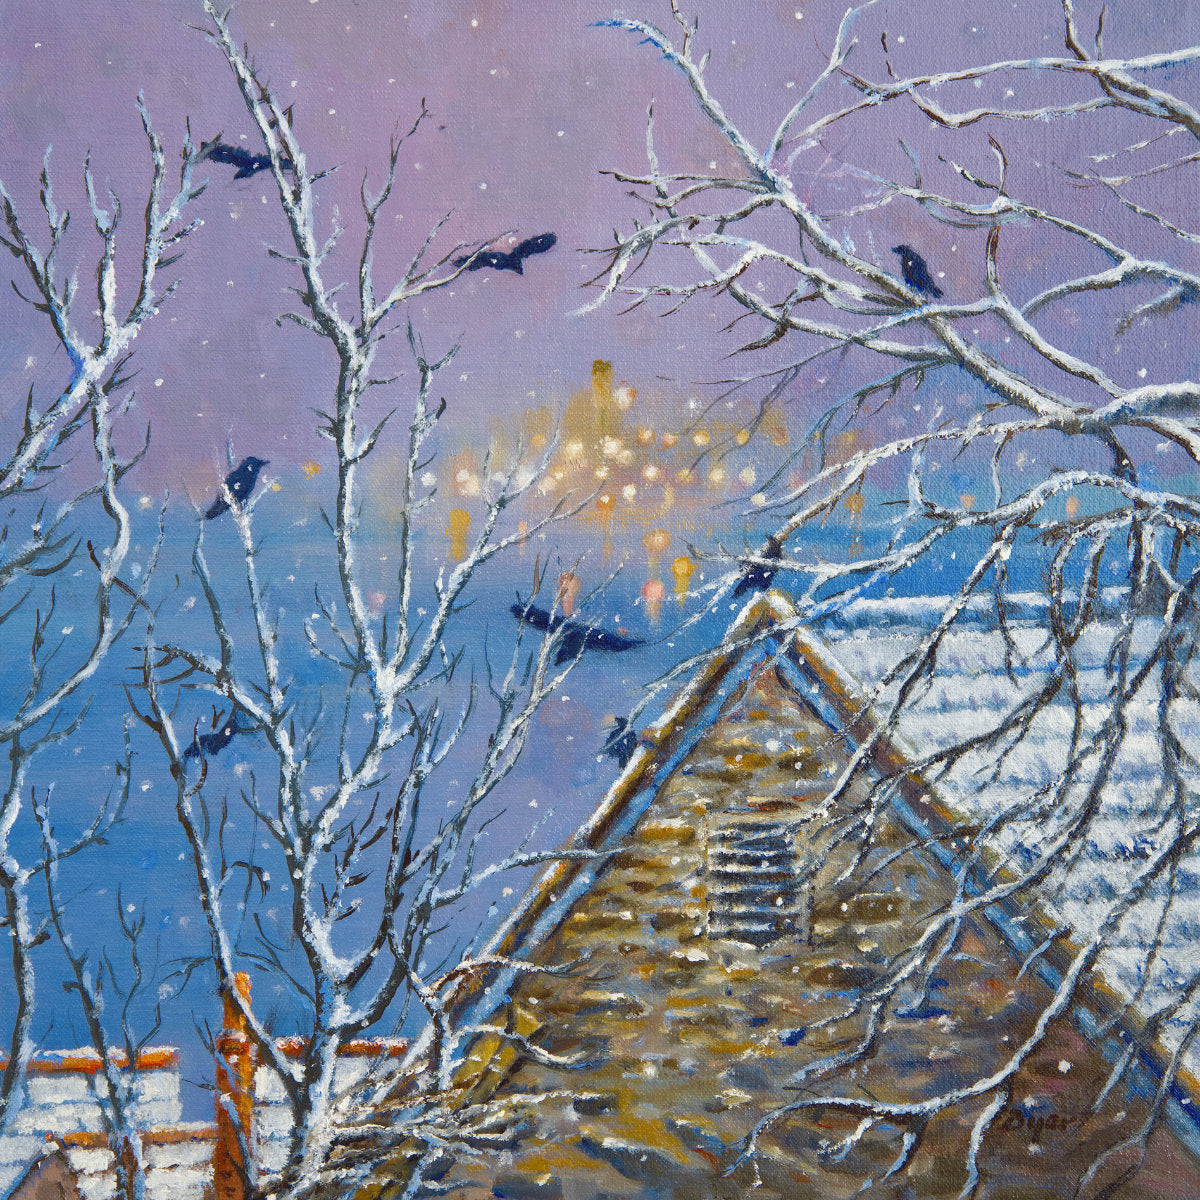 &#39;Rooks in the Snow. Falmouth&#39;, 14 x 14 inches original art oil on canvas. Paintings of Cornwall by Cornish Artist Ted Dyer from our Cornwall Art Gallery